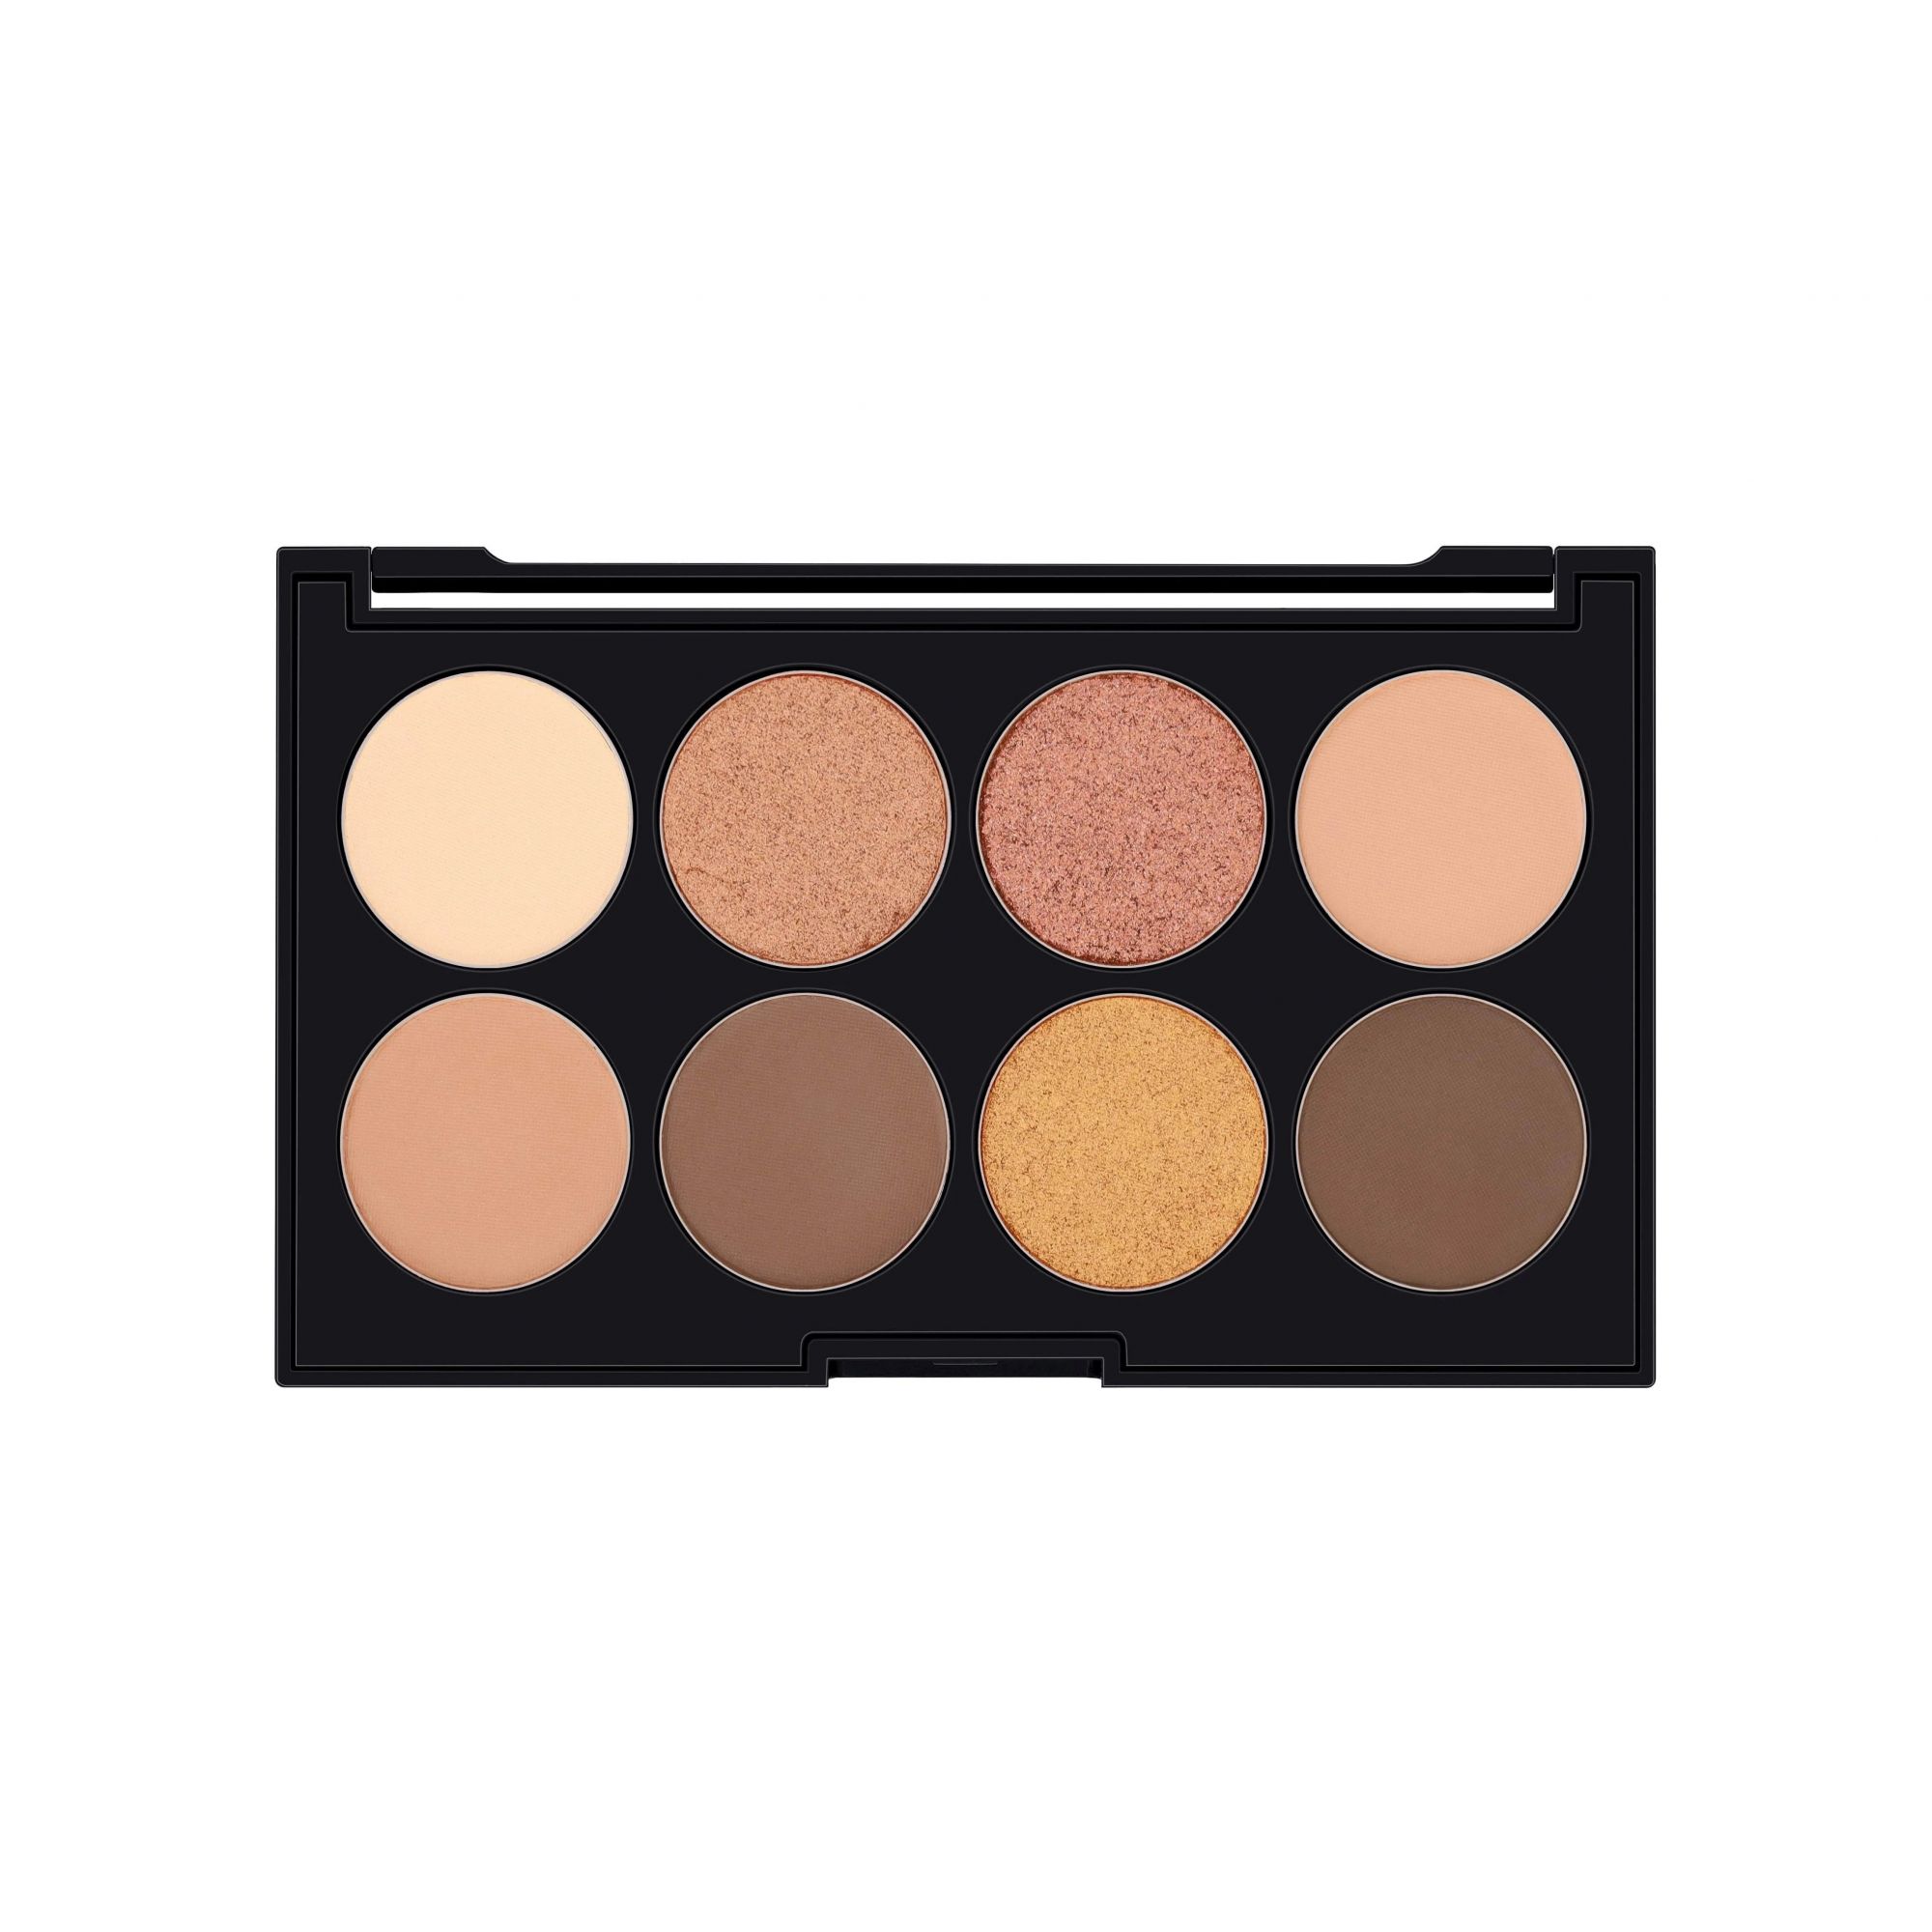 Royal Attraction Eyeshadow Palette